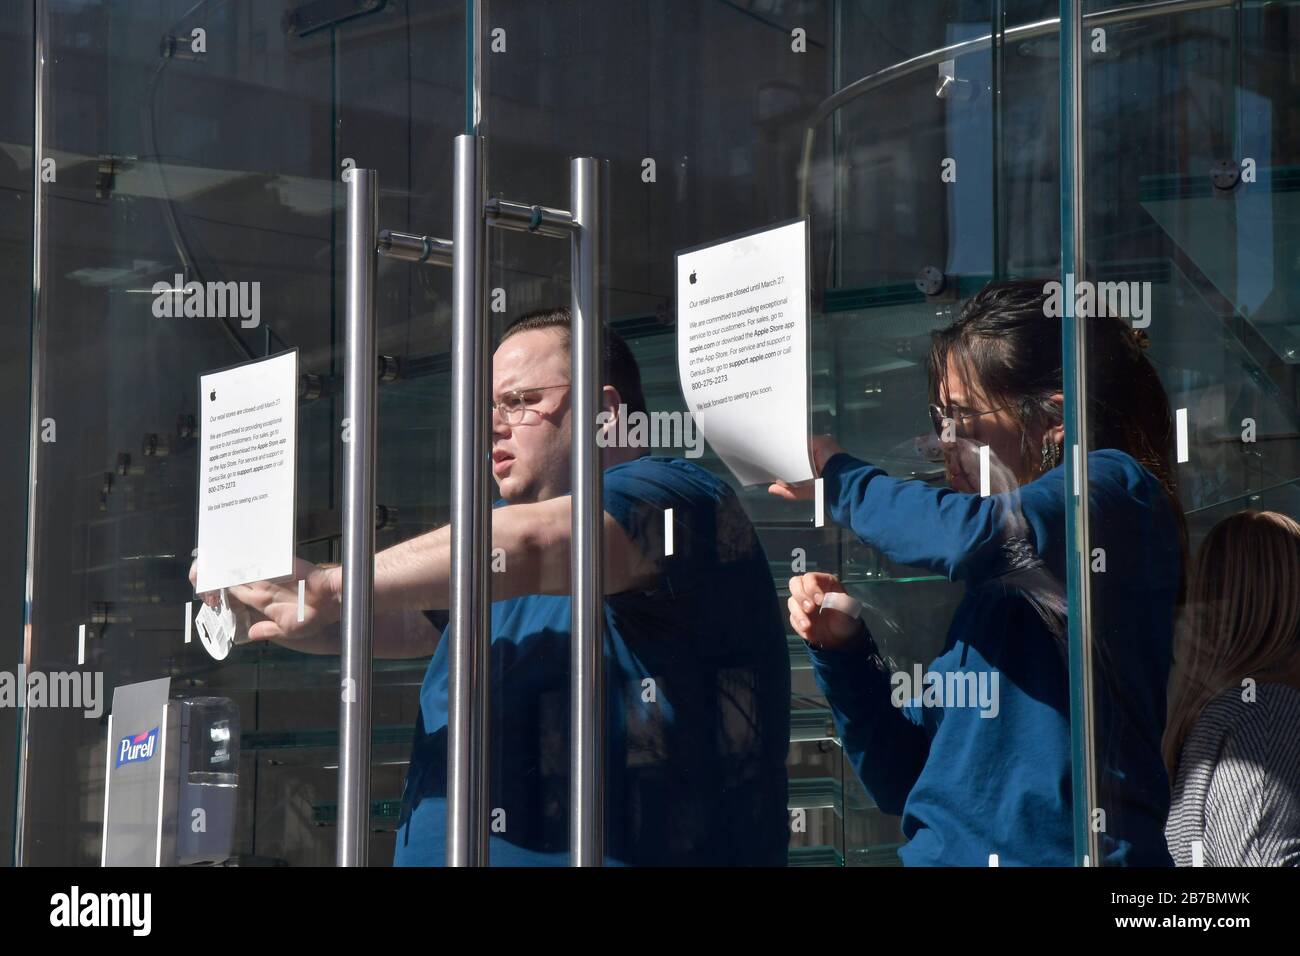 New York, USA. 14th Mar, 2020. Apple employees at the Manhattan Apple store in the Meatpacking District tape signs indicating the closure of its store on Saturday, March 14, 2020 in New York. Apple CEO Tim Cook announced it will close all its retail stores outside Greater China until March 27th in order to o minimize the risk of transmission of COVID-19 virus. (Photo by Louis Lanzano/Sipa USA) Credit: Sipa USA/Alamy Live News Stock Photo